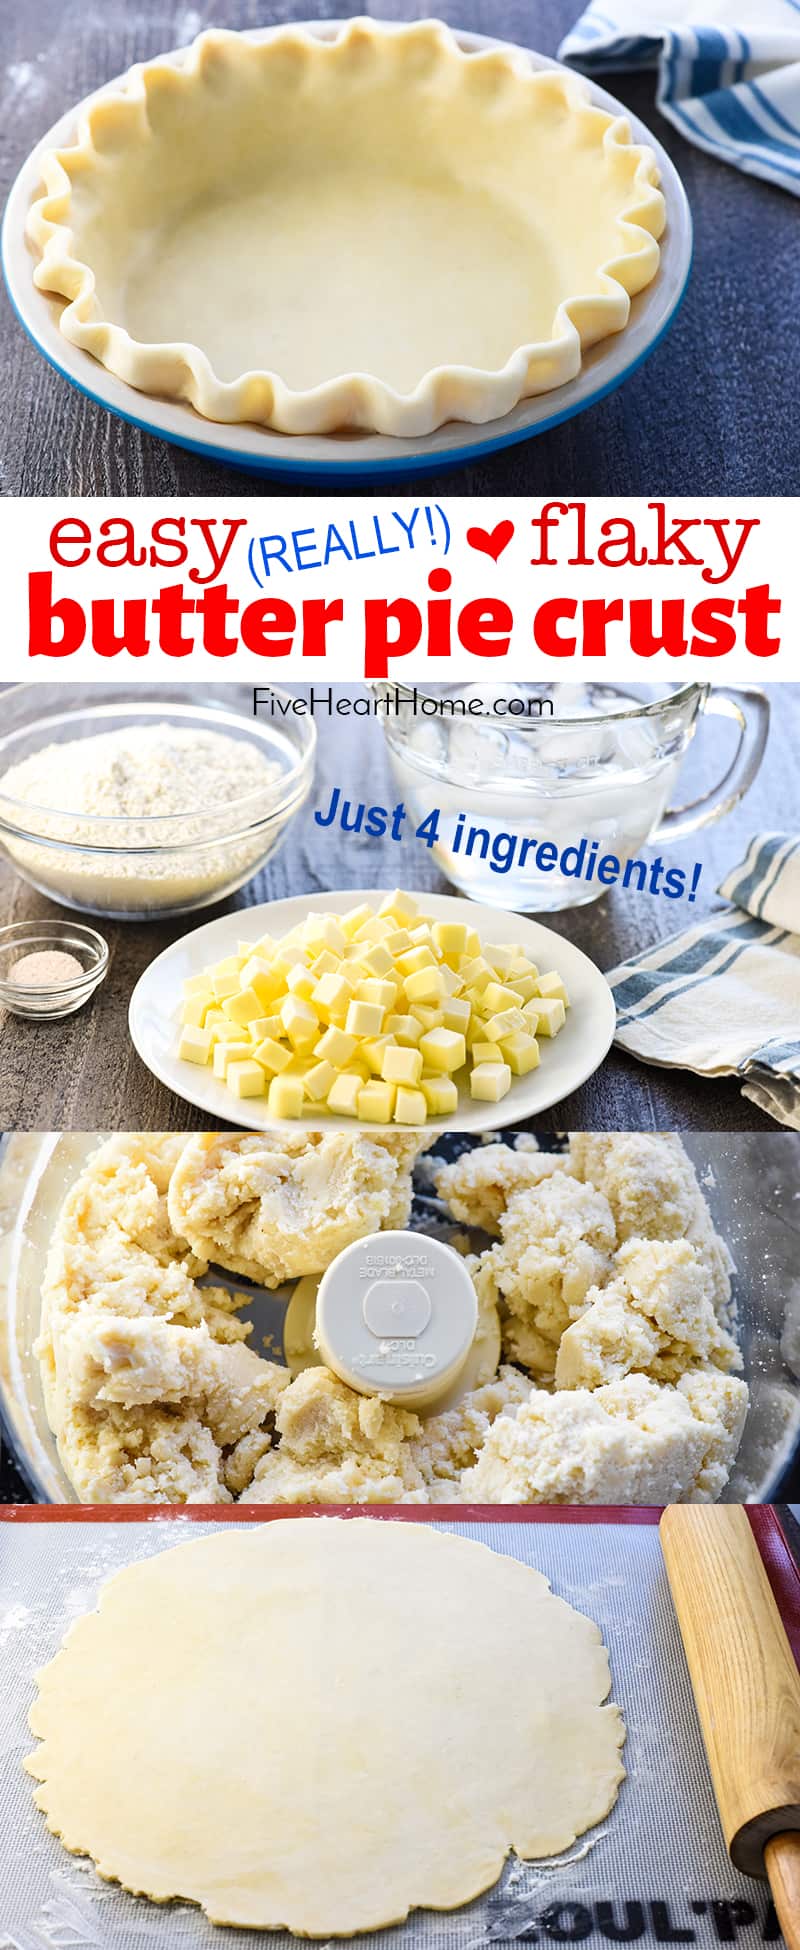 Butter Pie Crust ~ this flaky, tender, all-butter pie crust is THE BEST! It's unbelievably EASY to make from scratch with a few tricks and tips and just FOUR ingredients. In fact, it's so simple and delicious that you'll never buy a pre-made pie crust again! | FiveHeartHome.com #piecrust #butterpiecrust #piecrustrecipe via @fivehearthome